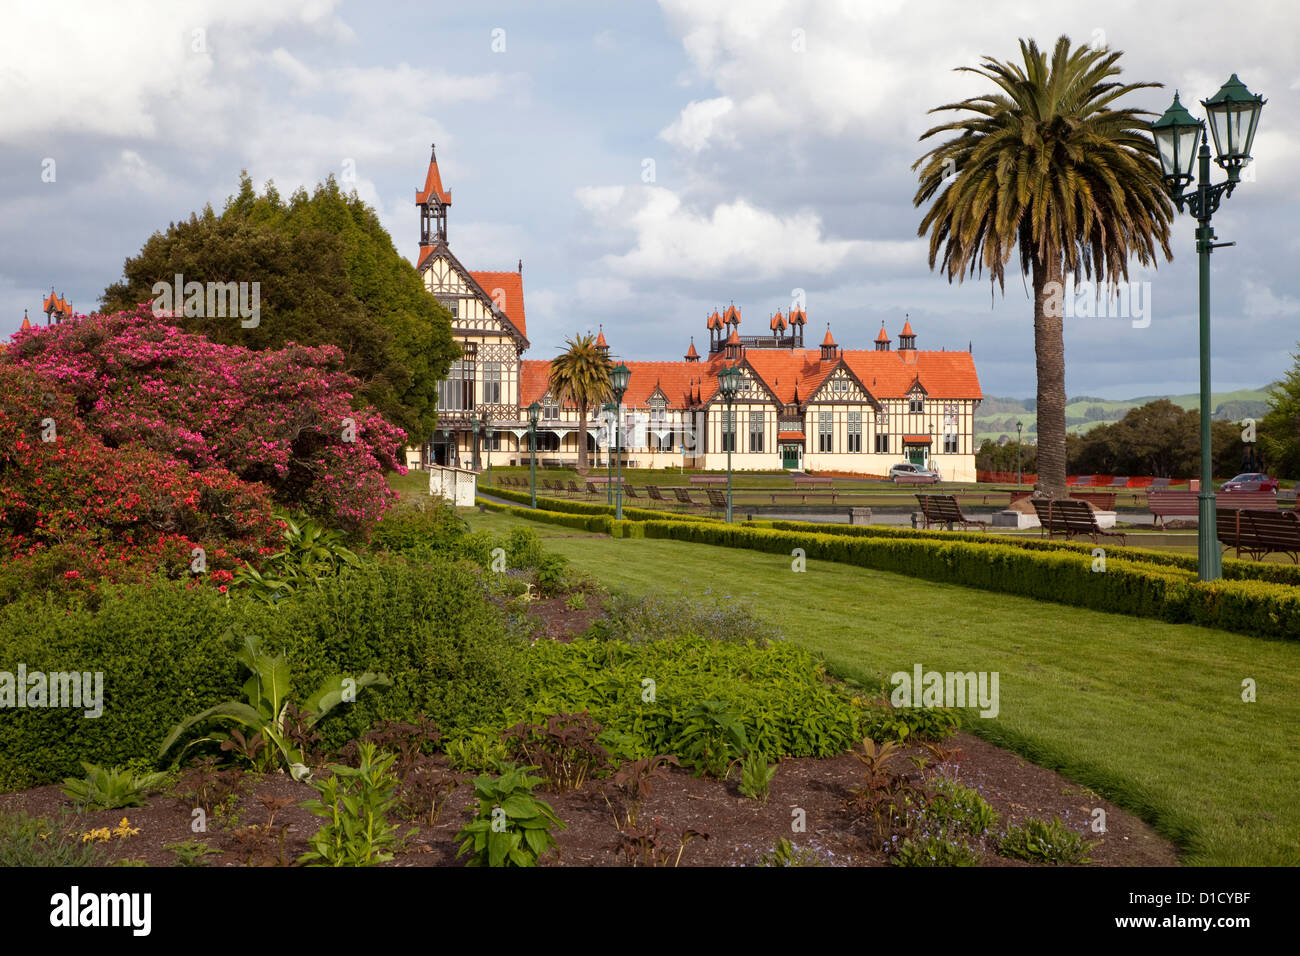 Government Gardens, Museum (former spa) in the Background. Rotorua, north island, New Zealand. Stock Photo